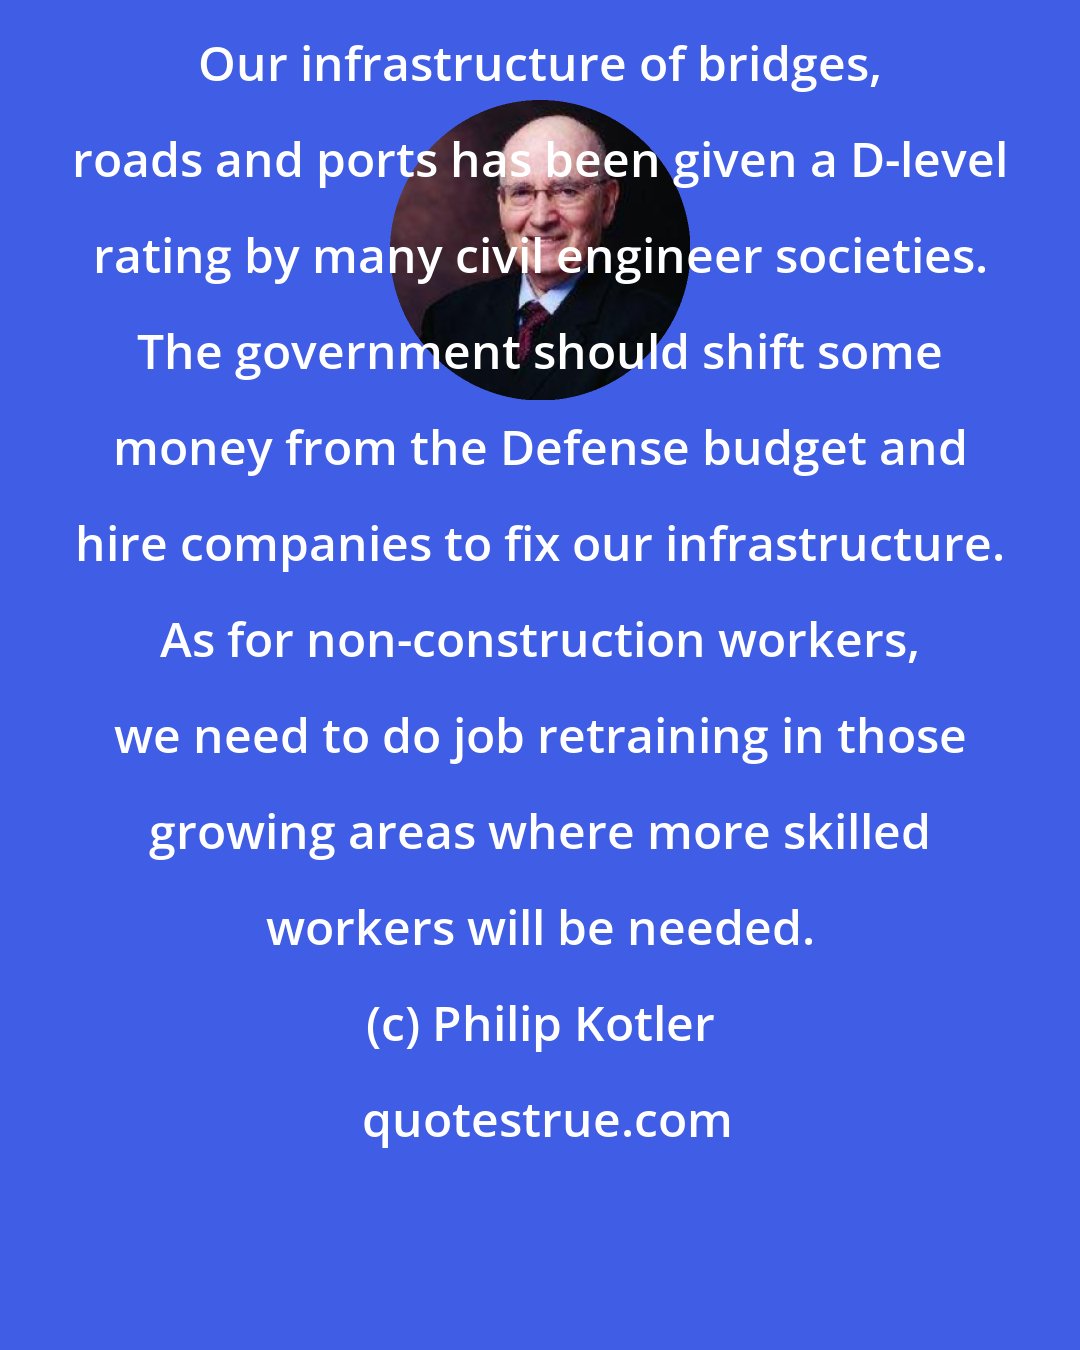 Philip Kotler: Our infrastructure of bridges, roads and ports has been given a D-level rating by many civil engineer societies. The government should shift some money from the Defense budget and hire companies to fix our infrastructure. As for non-construction workers, we need to do job retraining in those growing areas where more skilled workers will be needed.